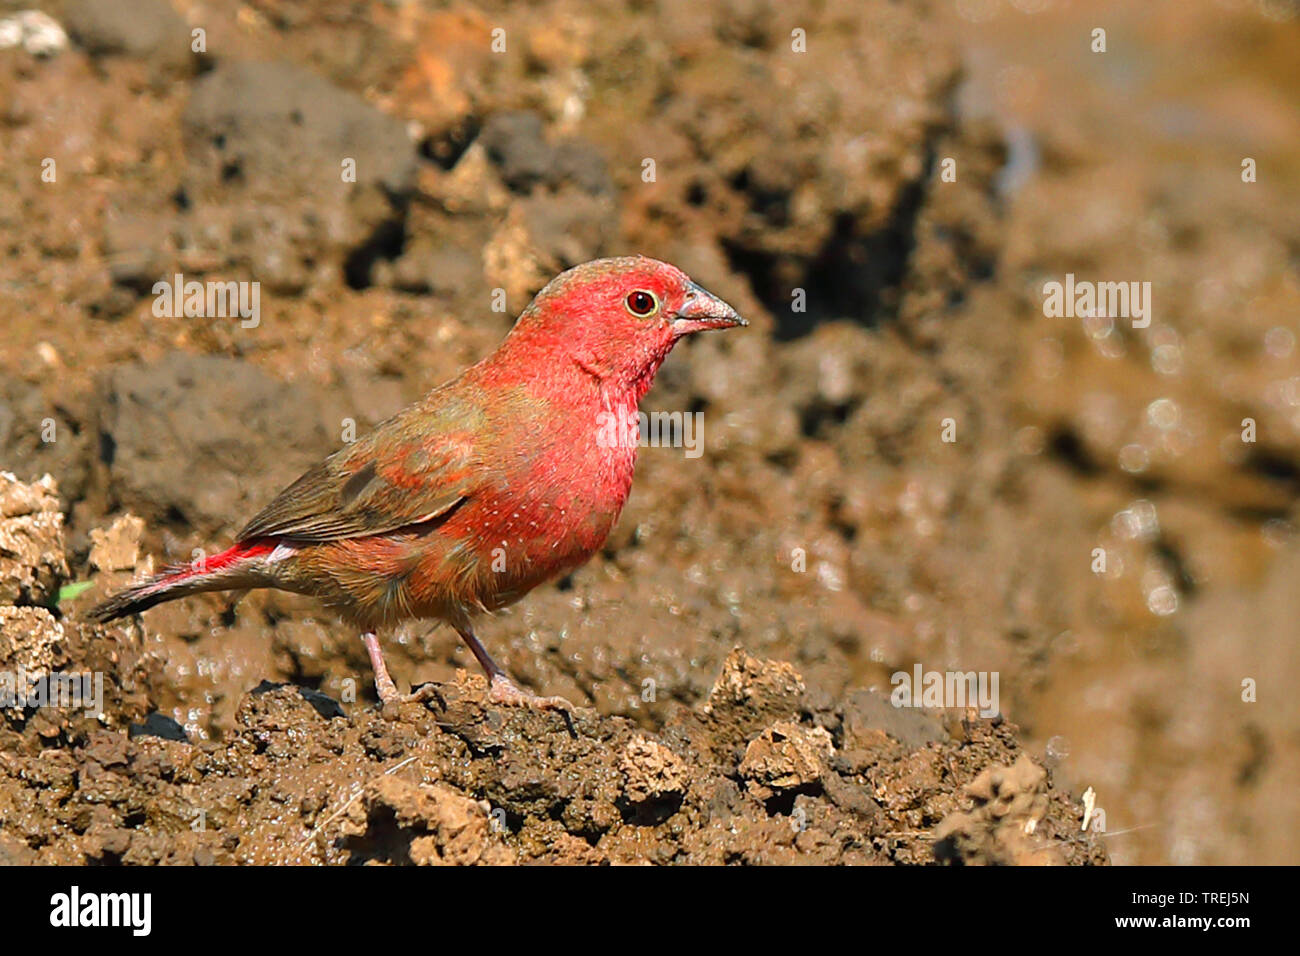 Red-billed fire finch (Lagonosticta senegala), male on the ground, South Africa, Mokala National Park Stock Photo